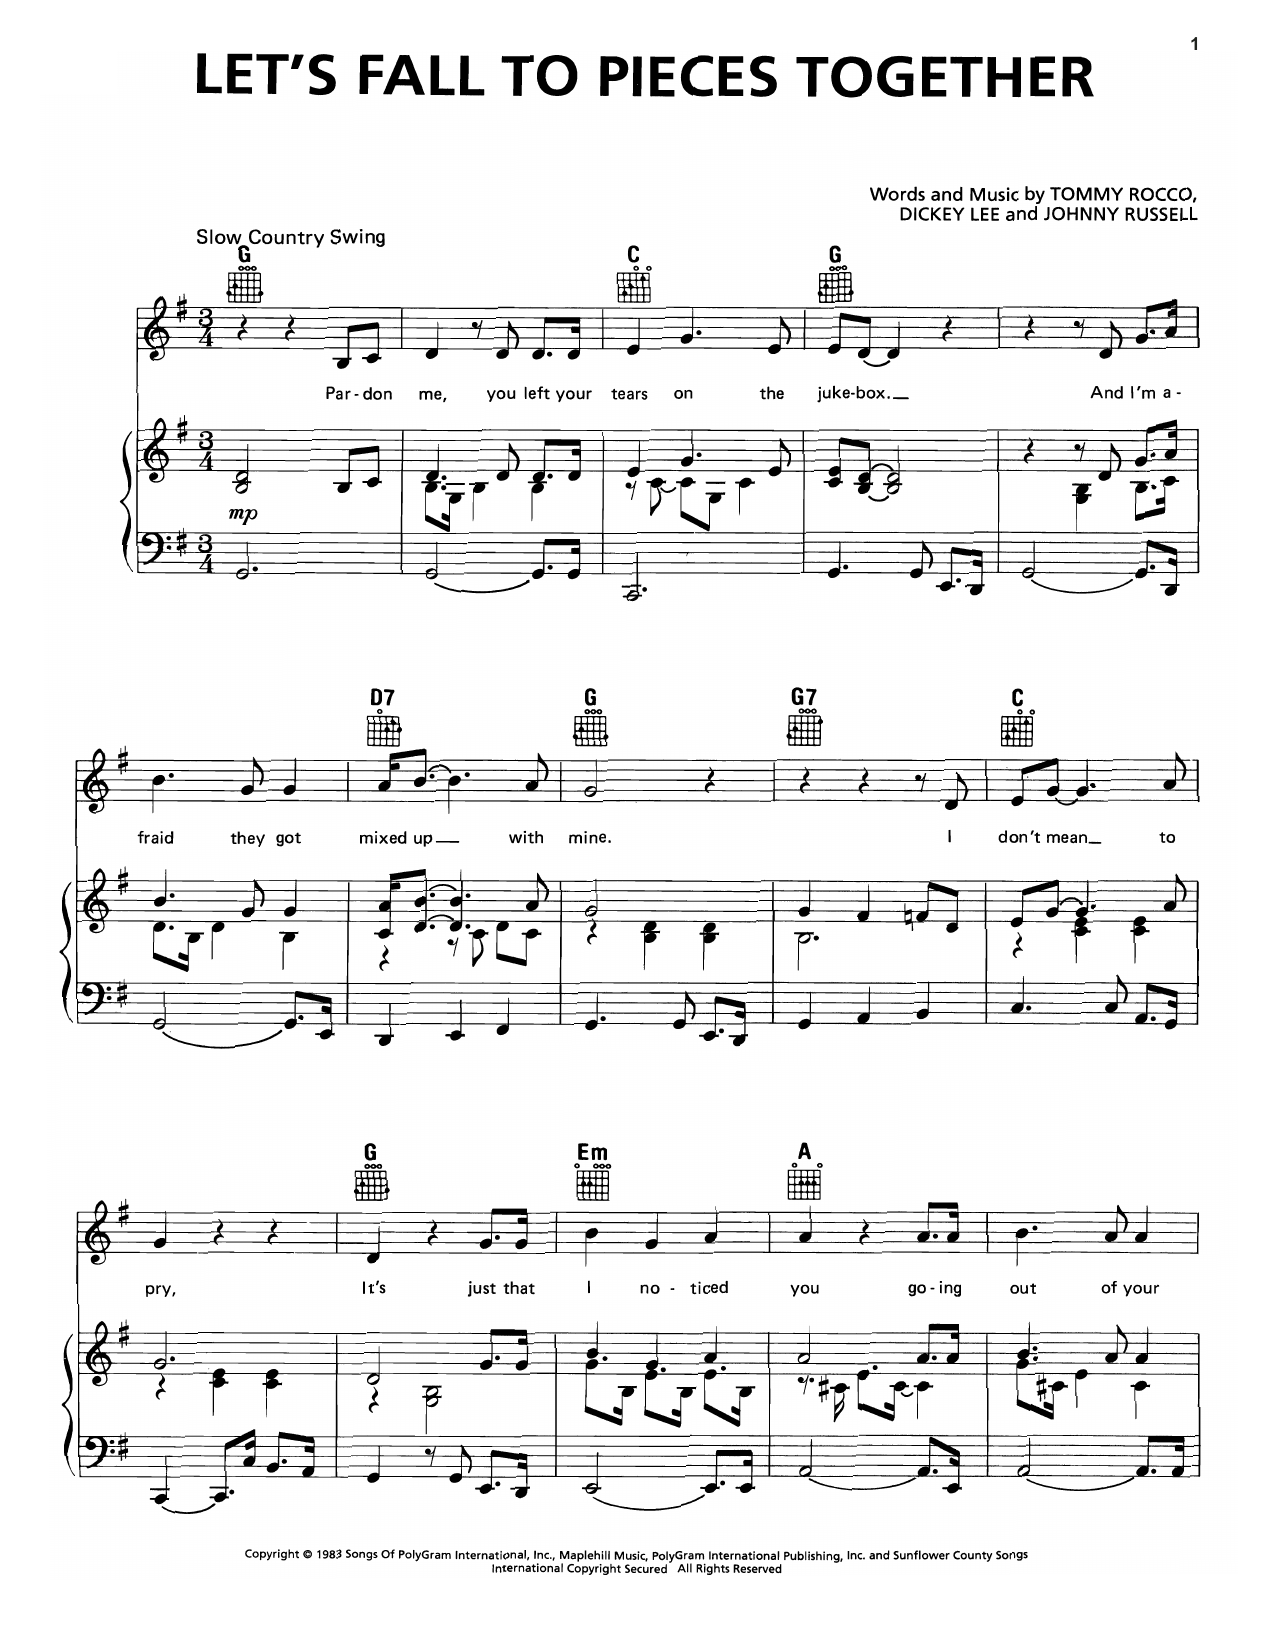 Download George Strait Let's Fall To Pieces Together Sheet Music